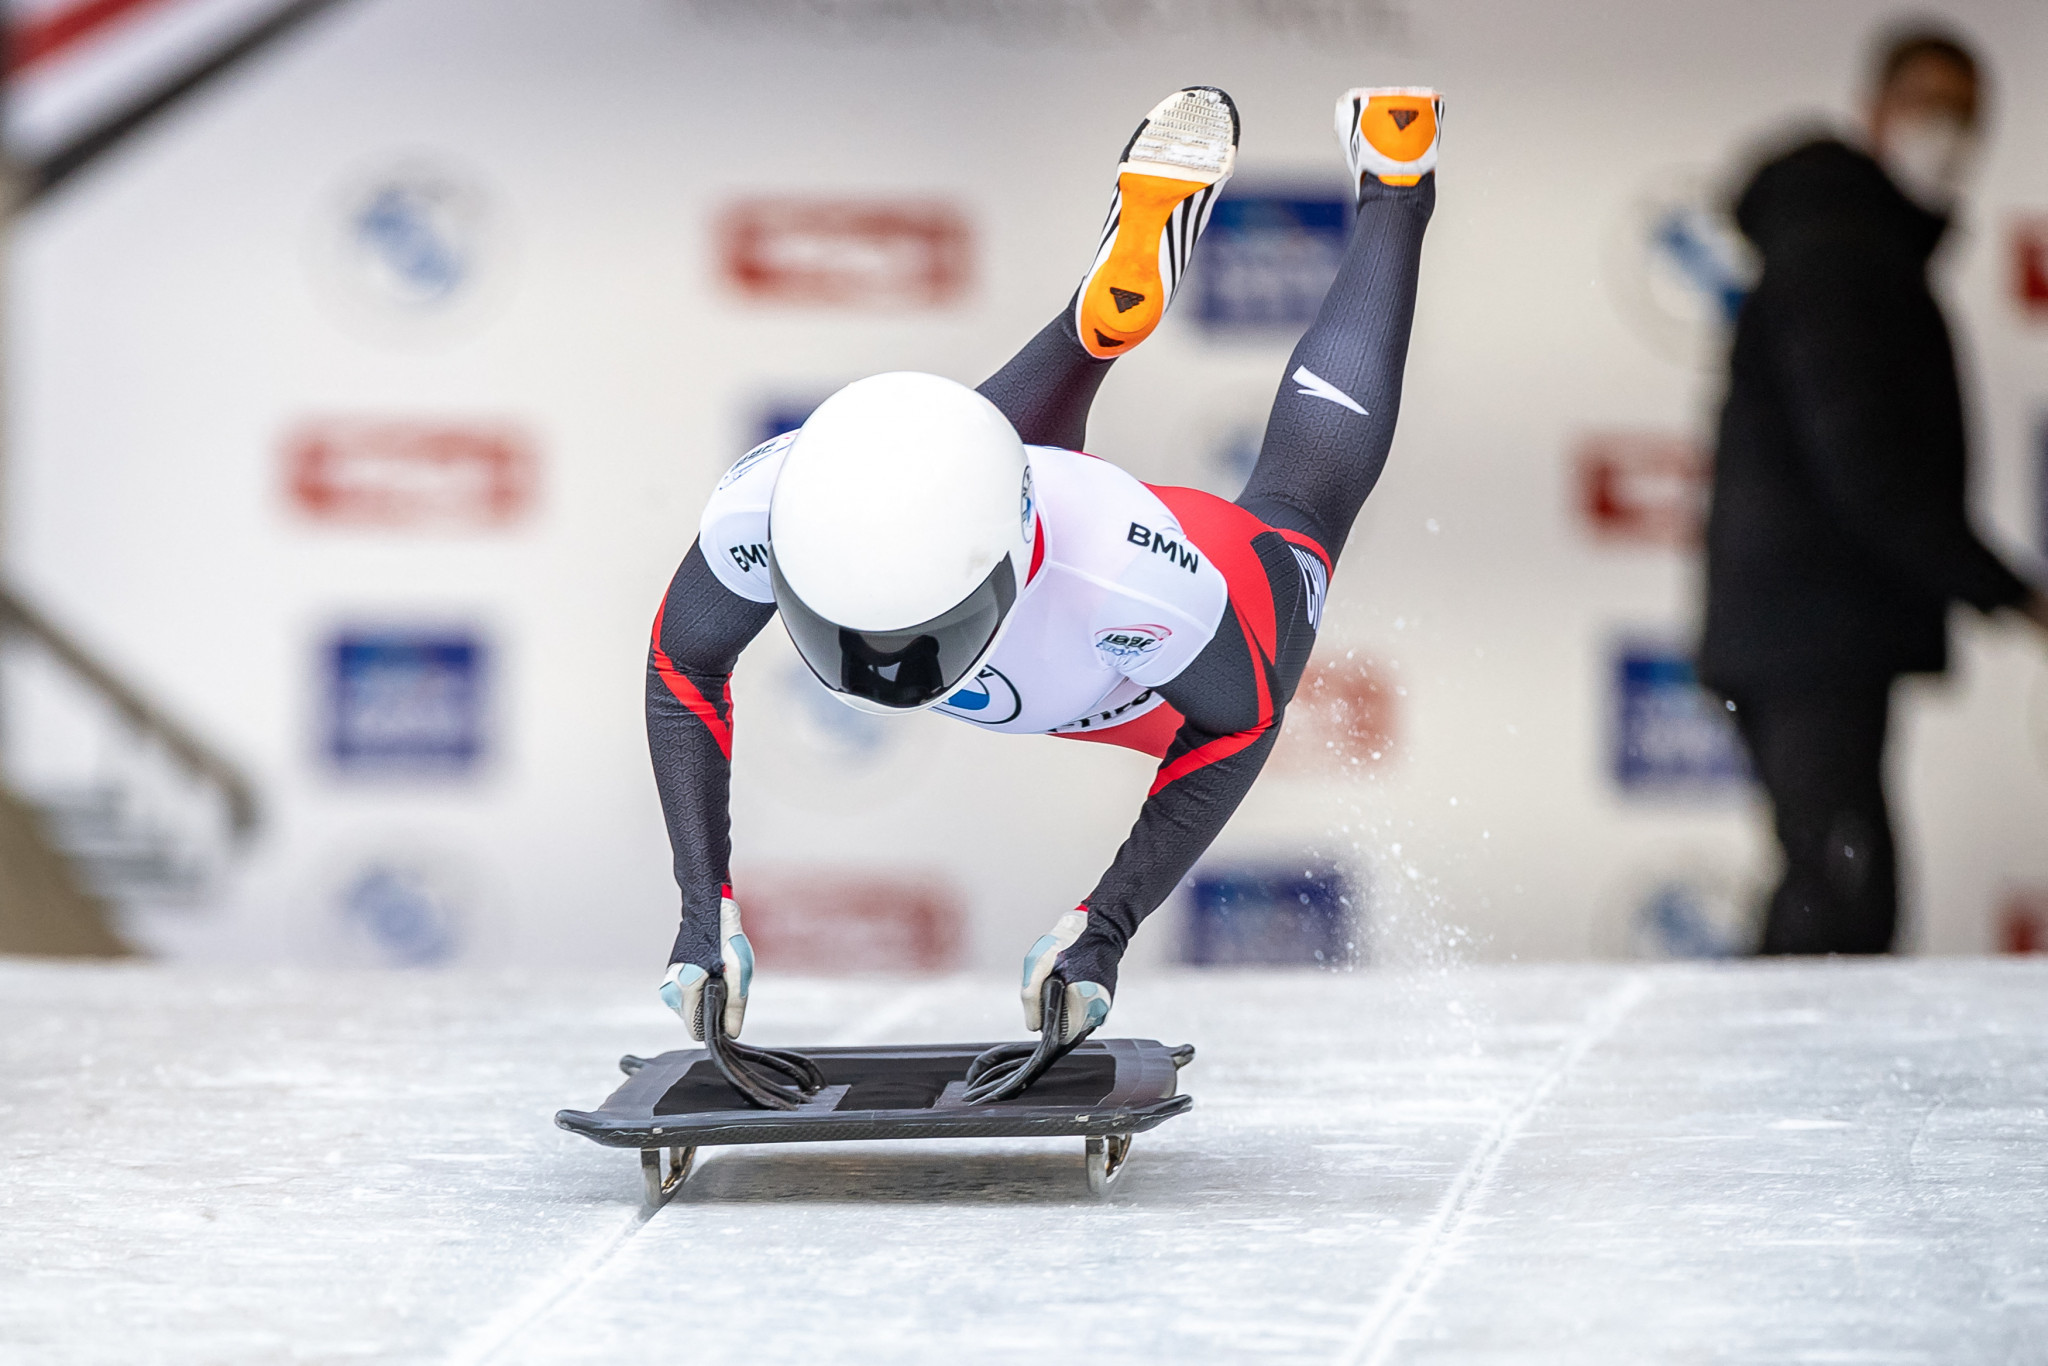 Zhao Dan will be the first Chinese athlete to compete in women's skeleton at the Winter Olympics ©Getty Images